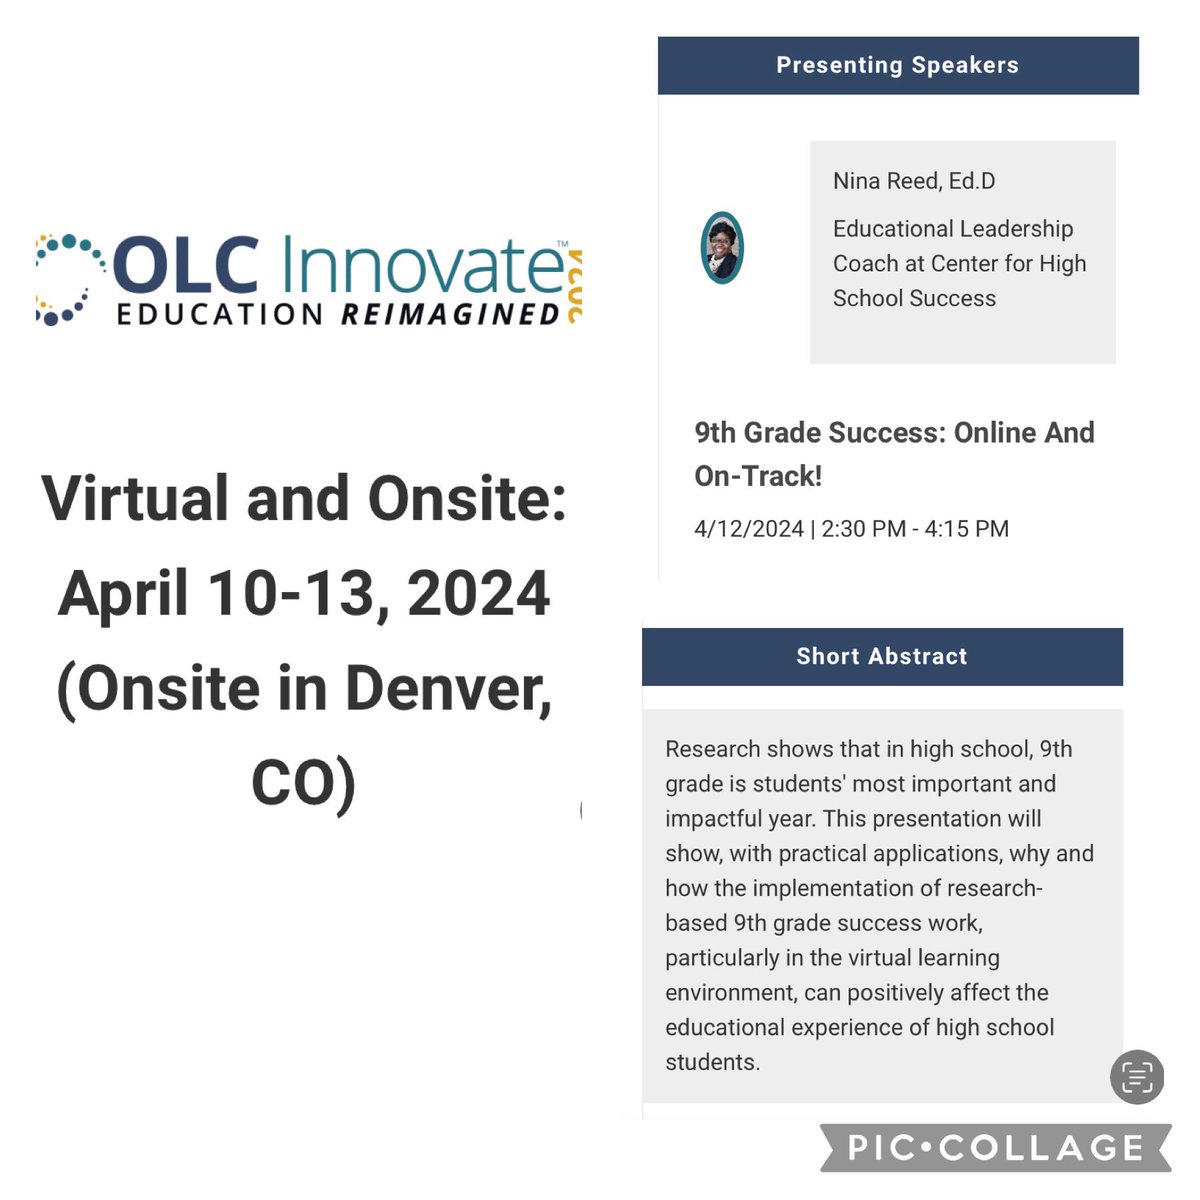 📣amazing opportunity! I’ll be in Denver next week presenting research-based 9th grade On-Track work to educators, practitioners, and other professionals who want to set students up for high school and postsecondary success—starting in 9th grade! 🎓🎓 @OLCToday #OLCInnovate